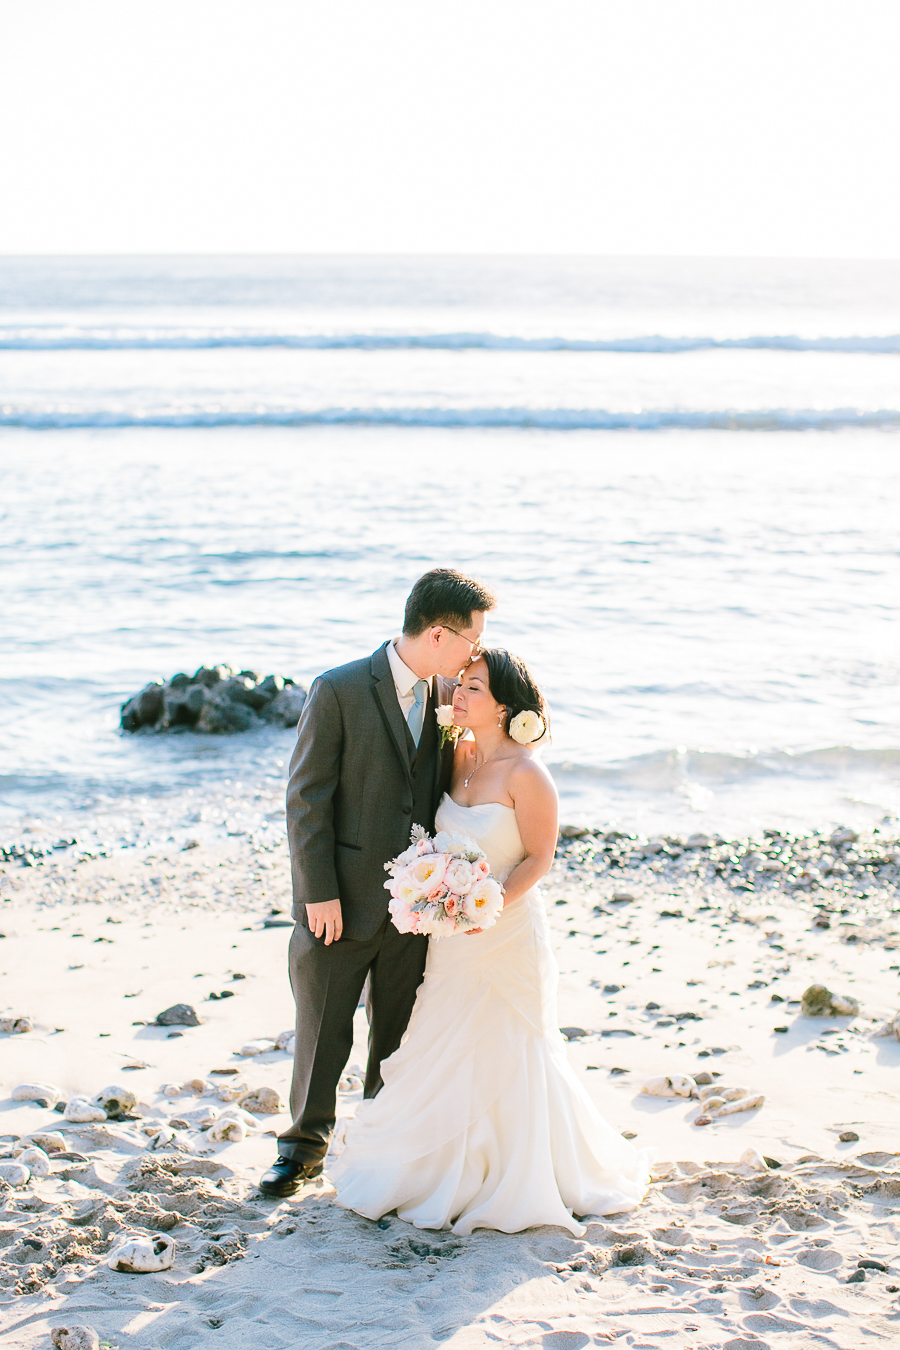 Say Hello to the Tropical Wedding of Your Dreams | The Perfect Wedding Maui